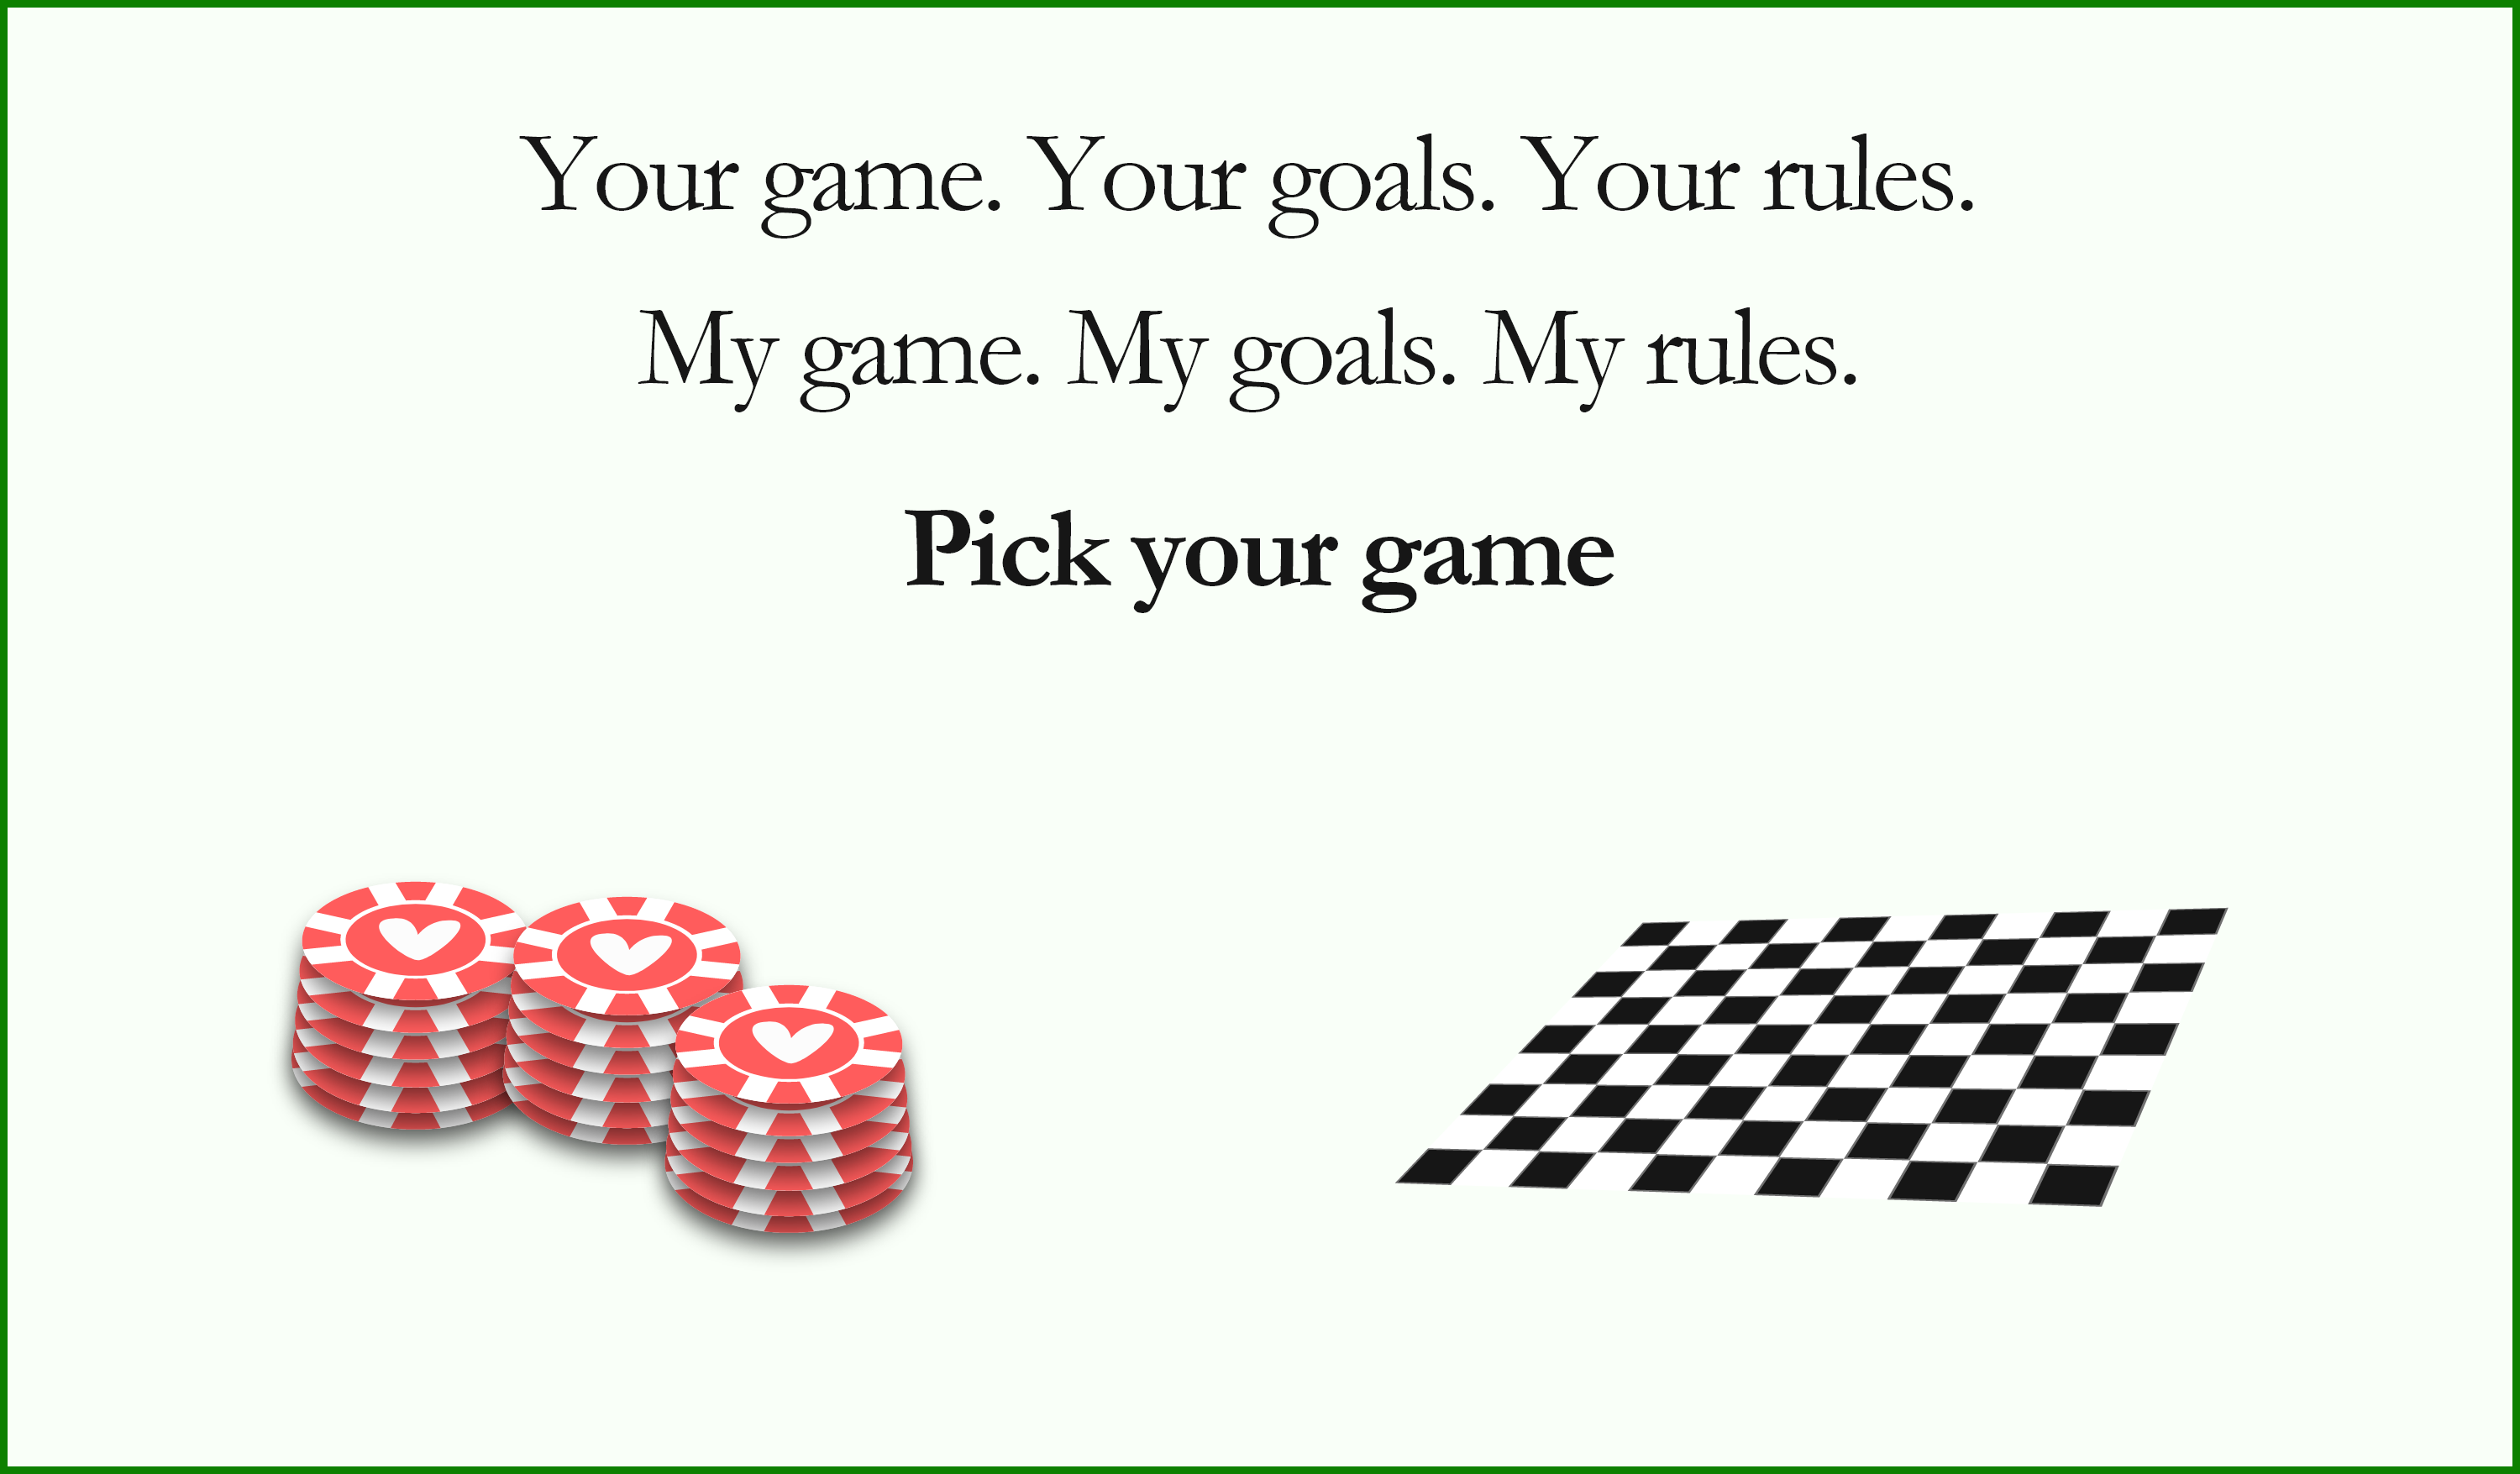 two games to pick from: poker and chess